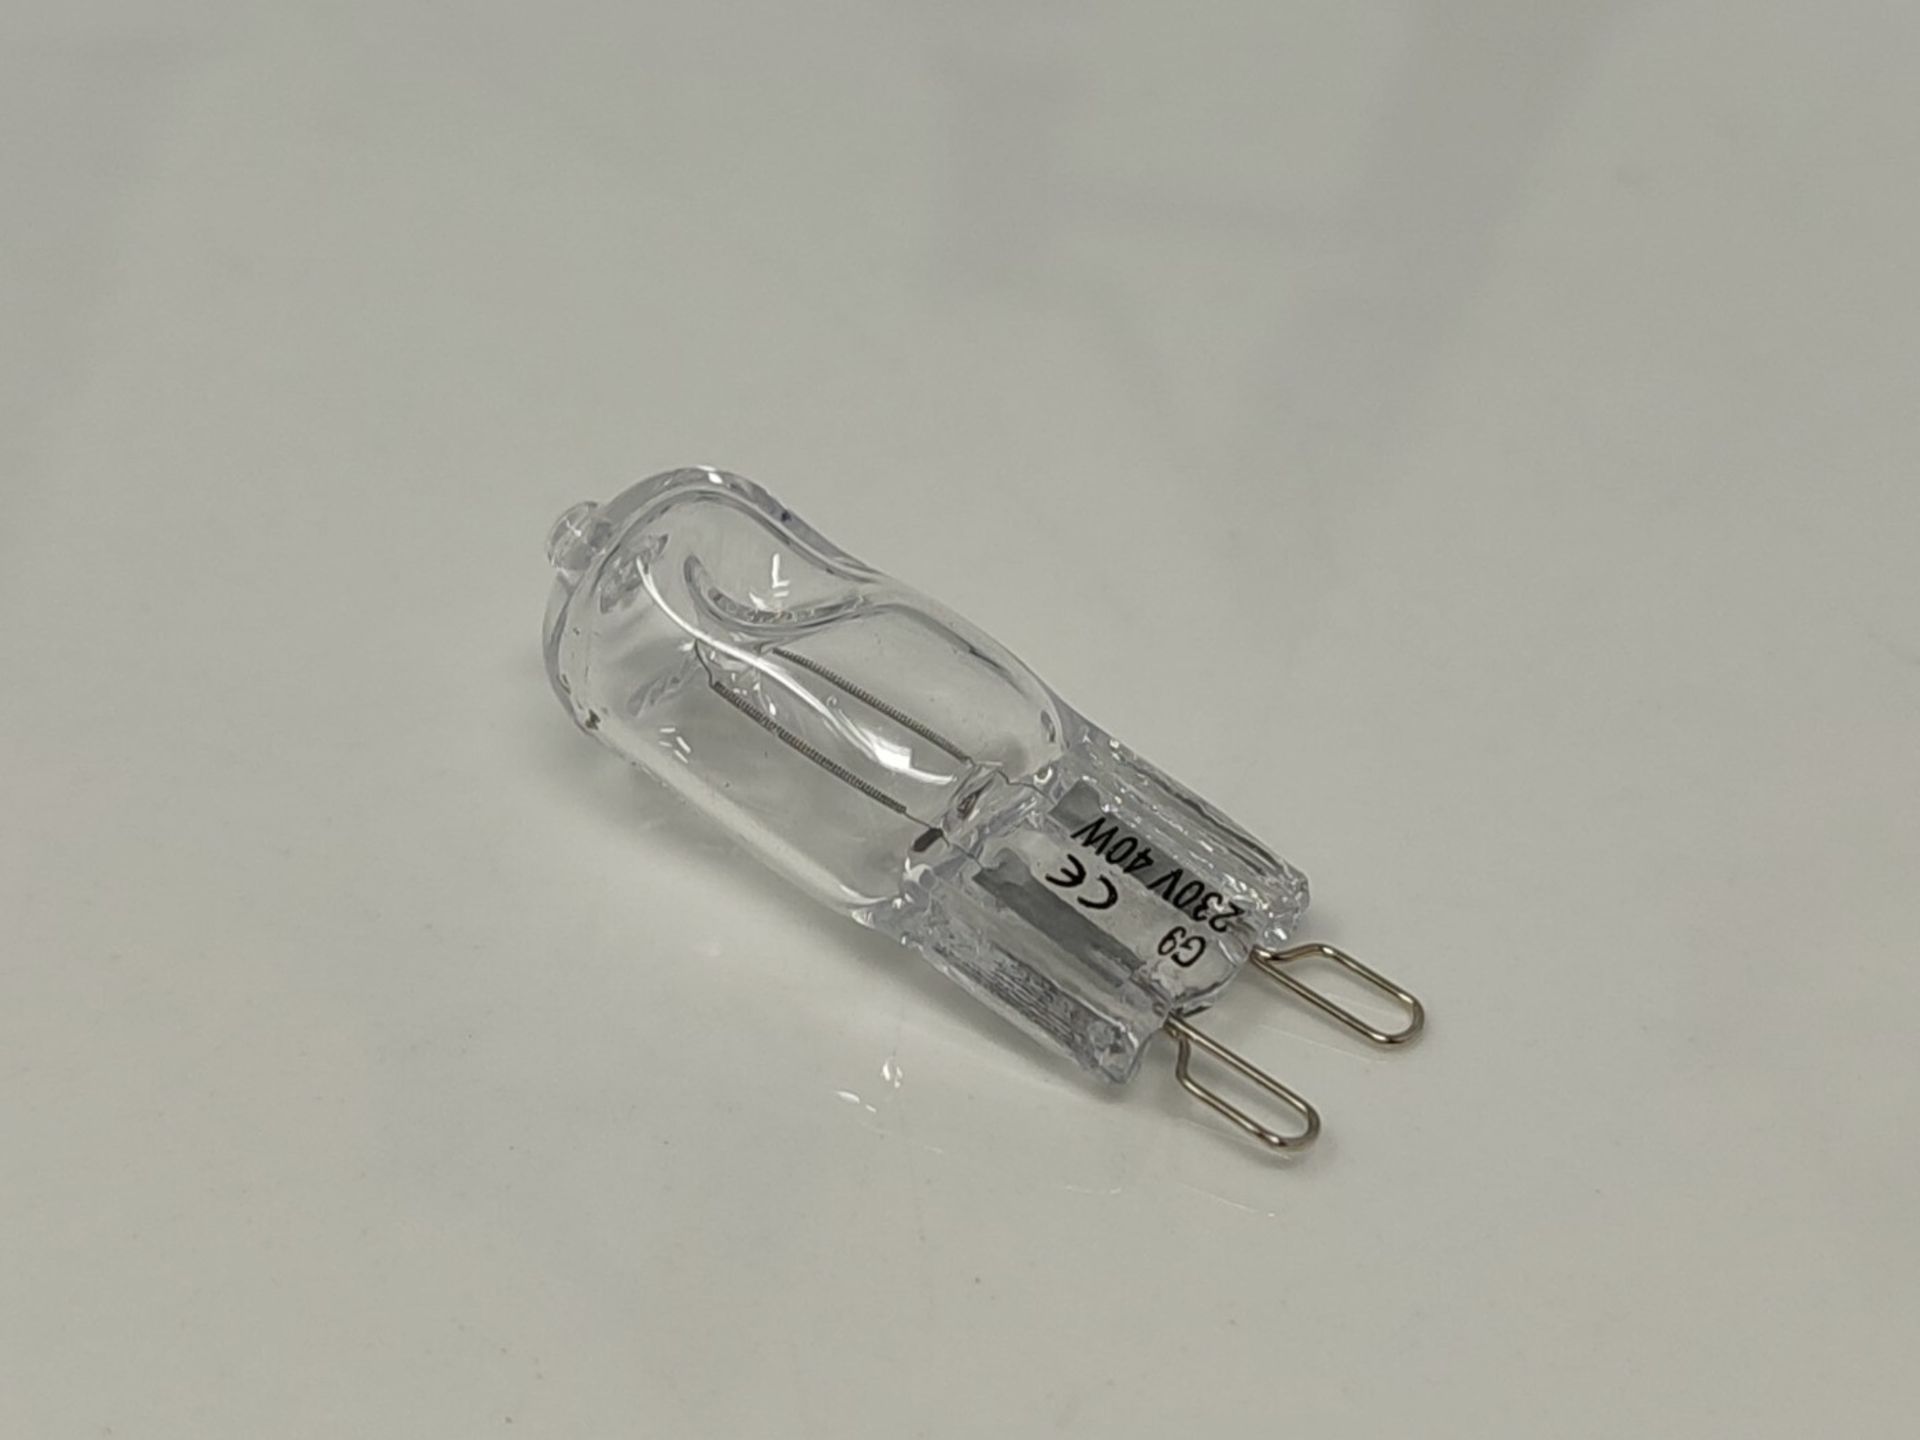 Electro Dh. S.A. 1265140 Halogen Bulb Type G9 - Image 2 of 2